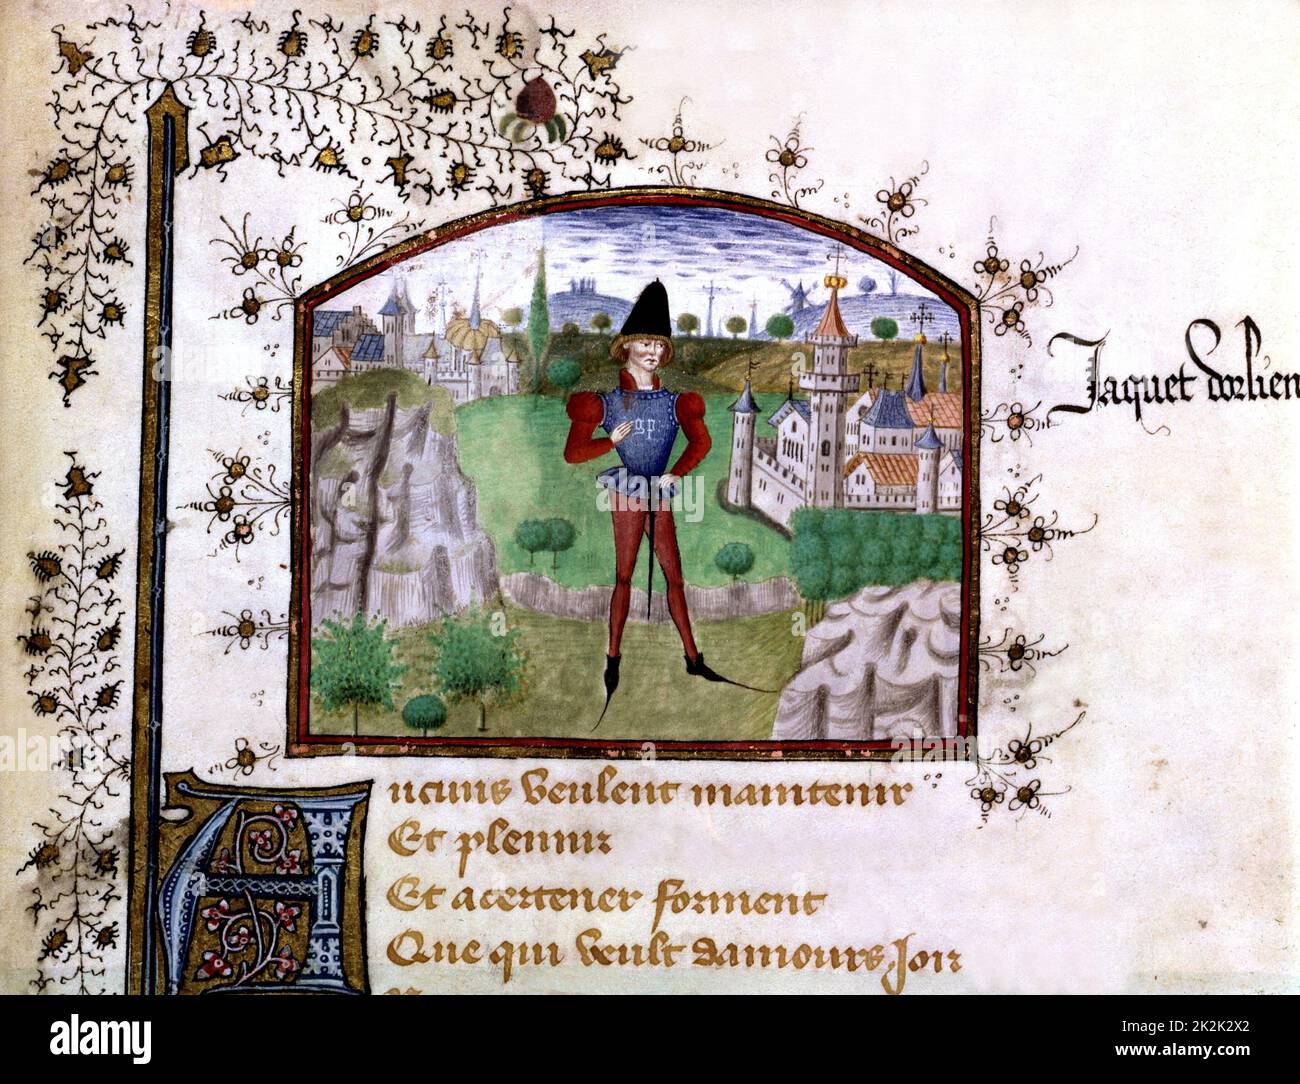 Poem composed by Jean Sénéchal, king Charles VI's chamberlain : 'Book of the Hundred ballades. The Troubadour'. Middle Ages. France. Bibliothèque de Chantilly. Stock Photo